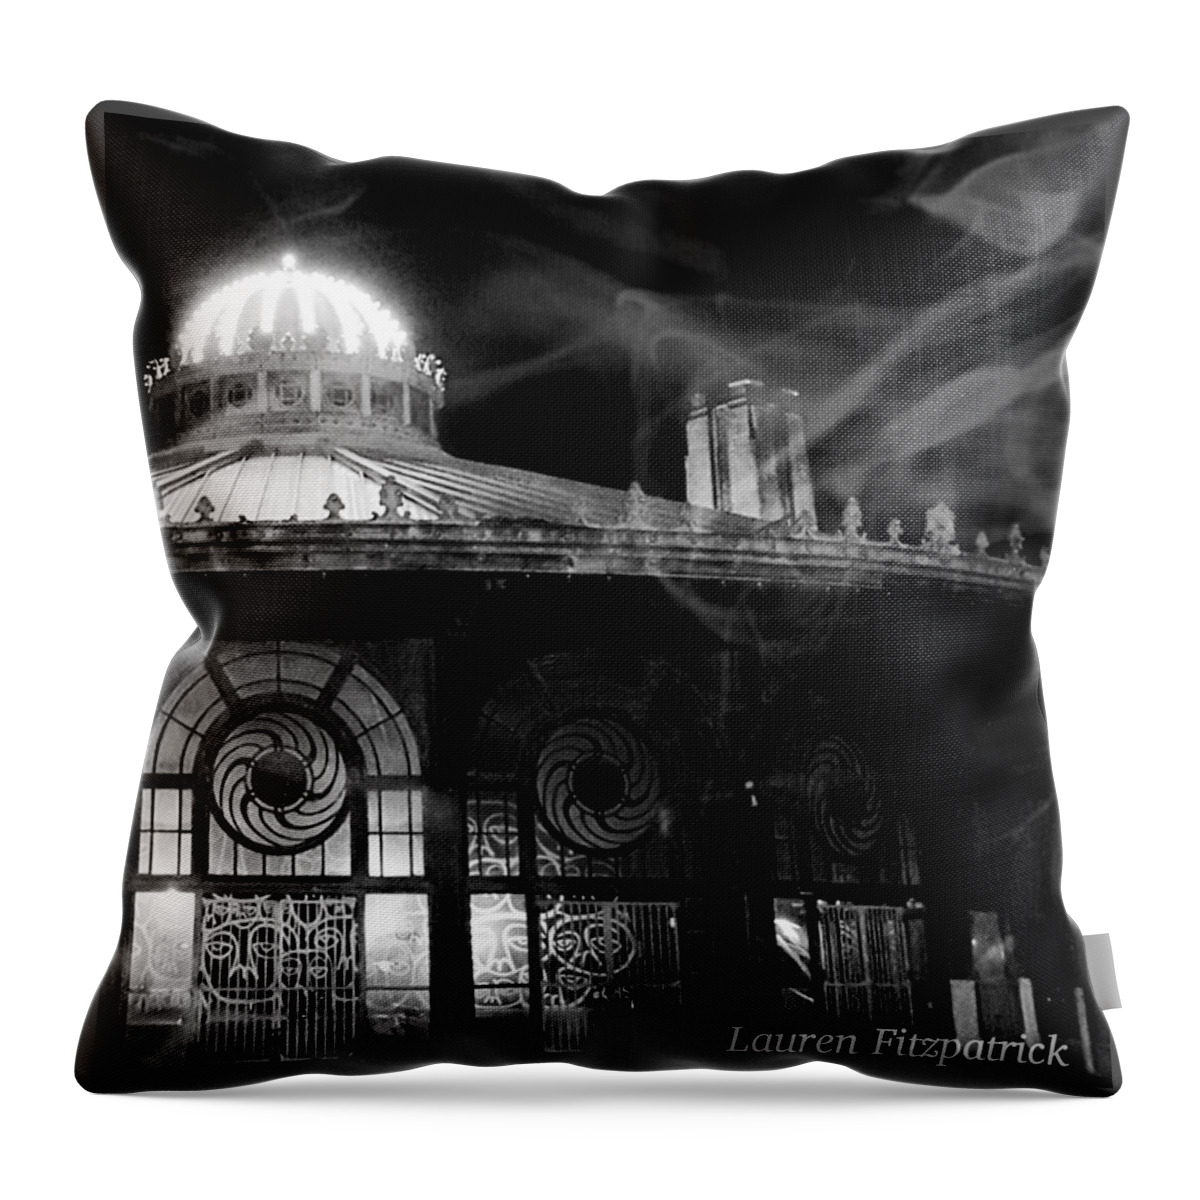  Throw Pillow featuring the photograph Haunted Asbury Park by Lauren Fitzpatrick